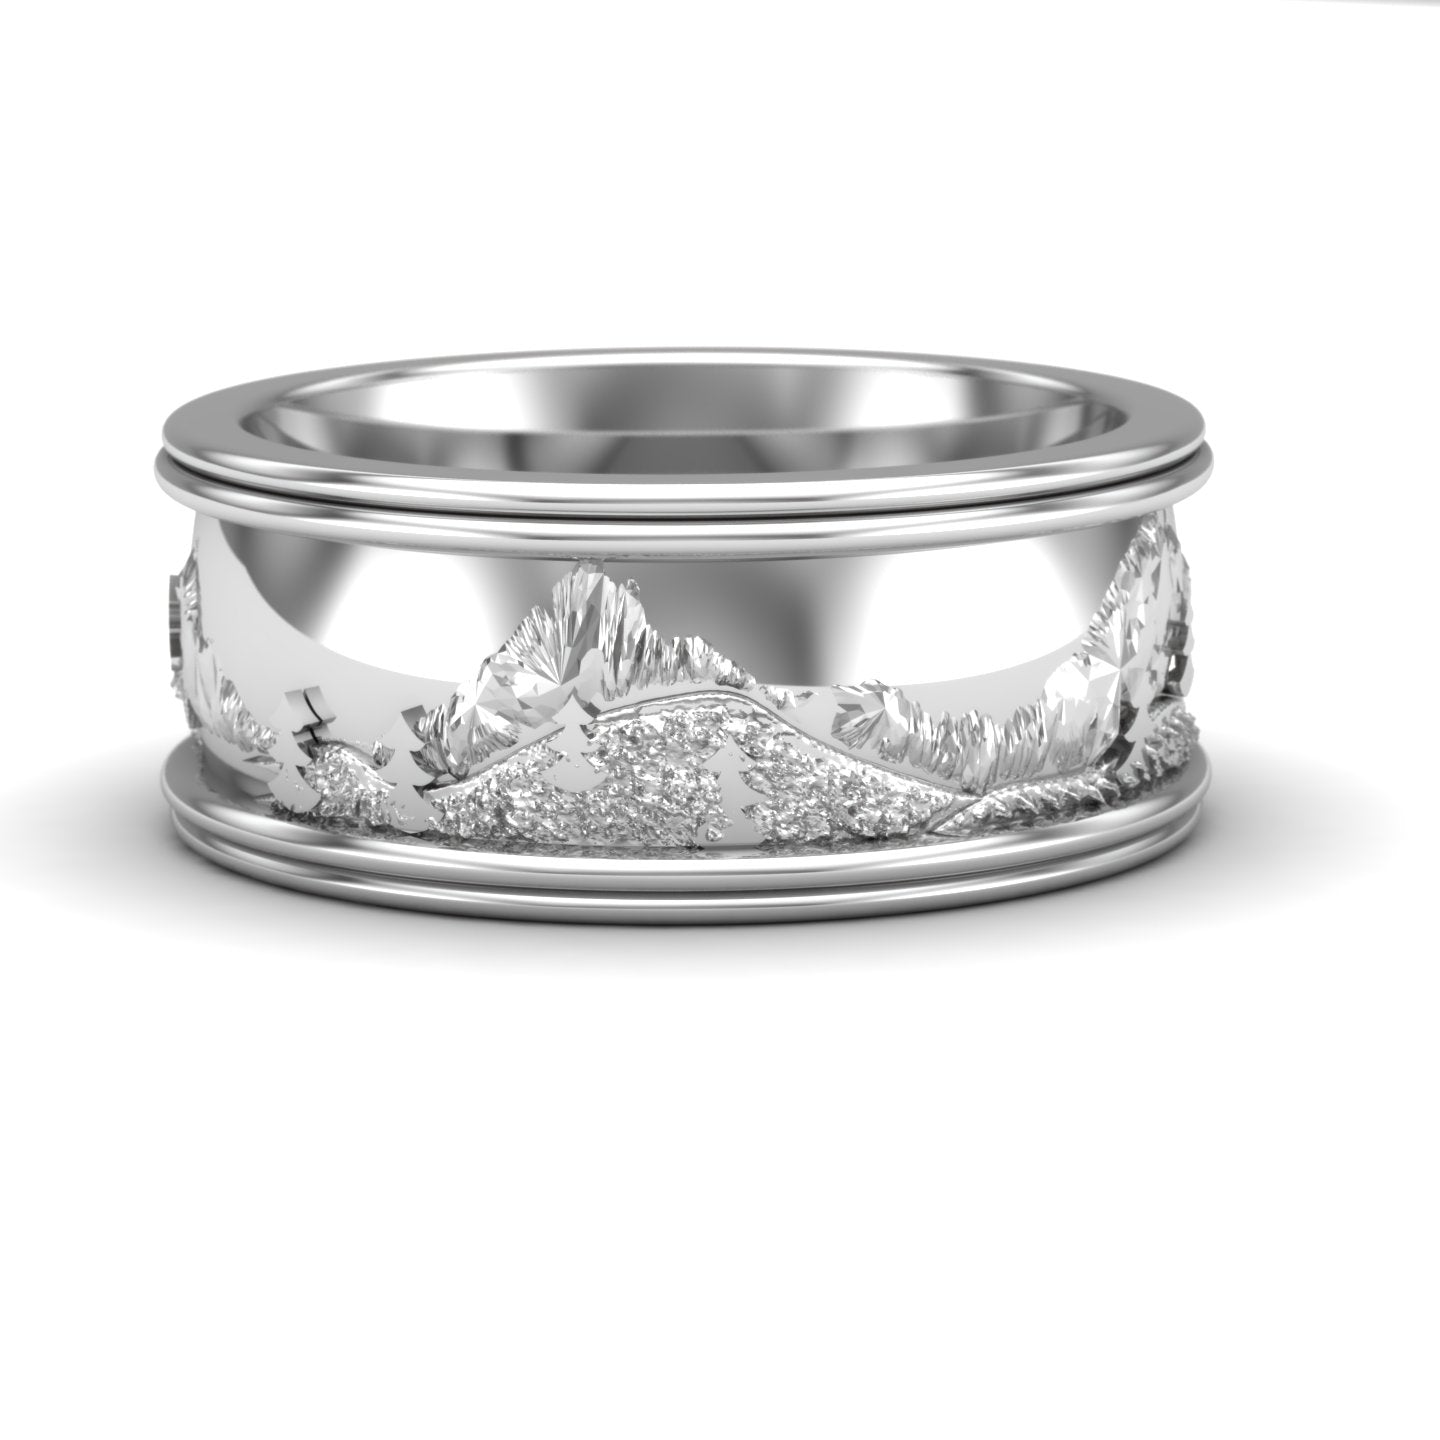 rocky mountain wedding band yellow sapphire in sterling silver - Charles Babb Designs - mountain scene